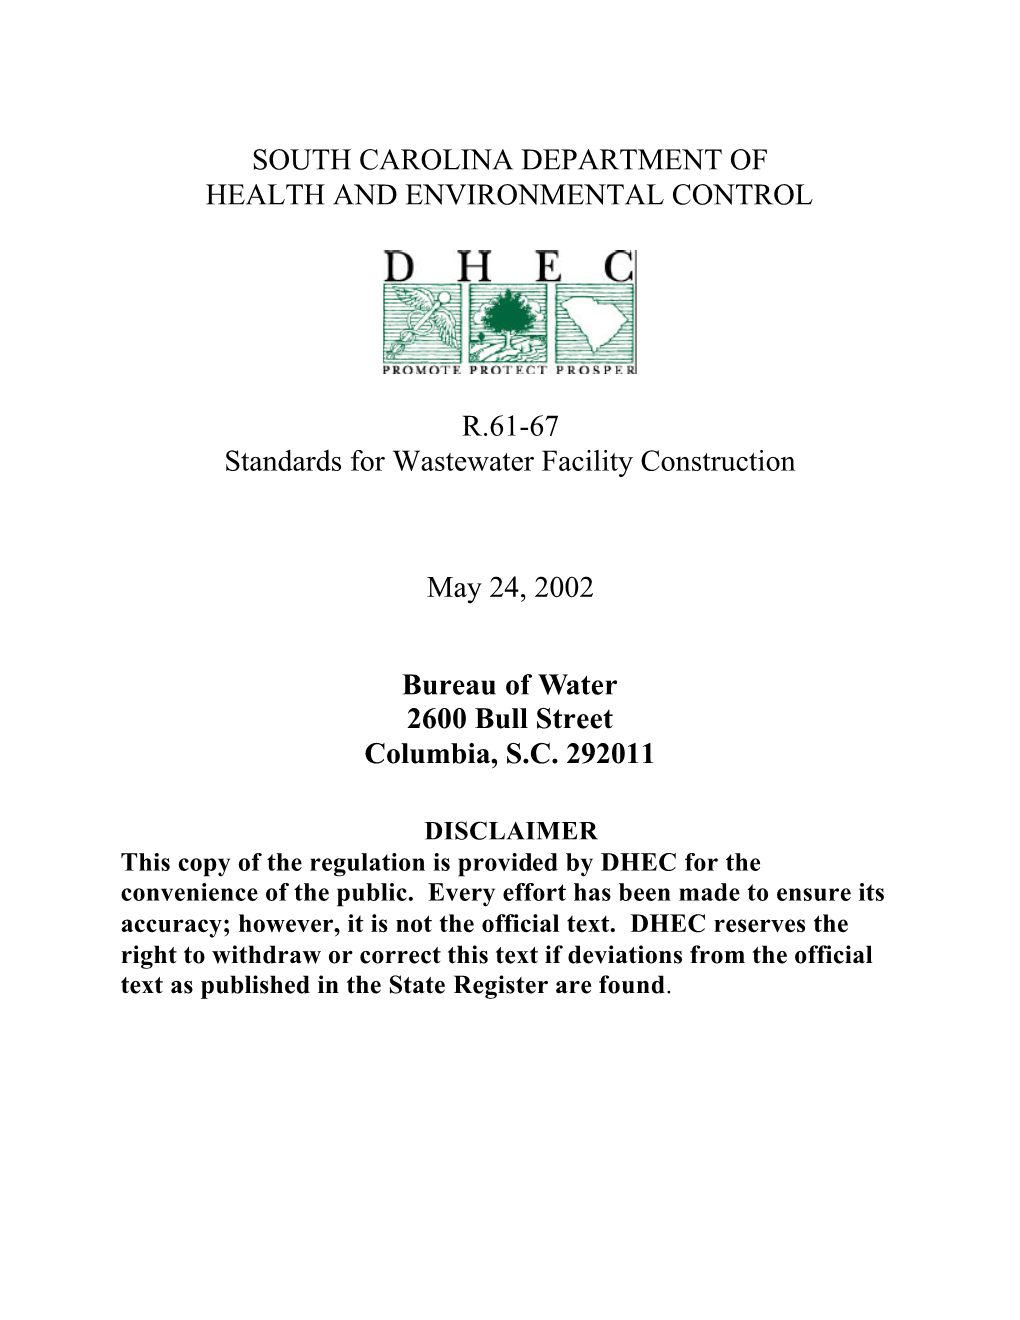 SCDHEC R.61-67, Standards for Wastewater Facility Construction